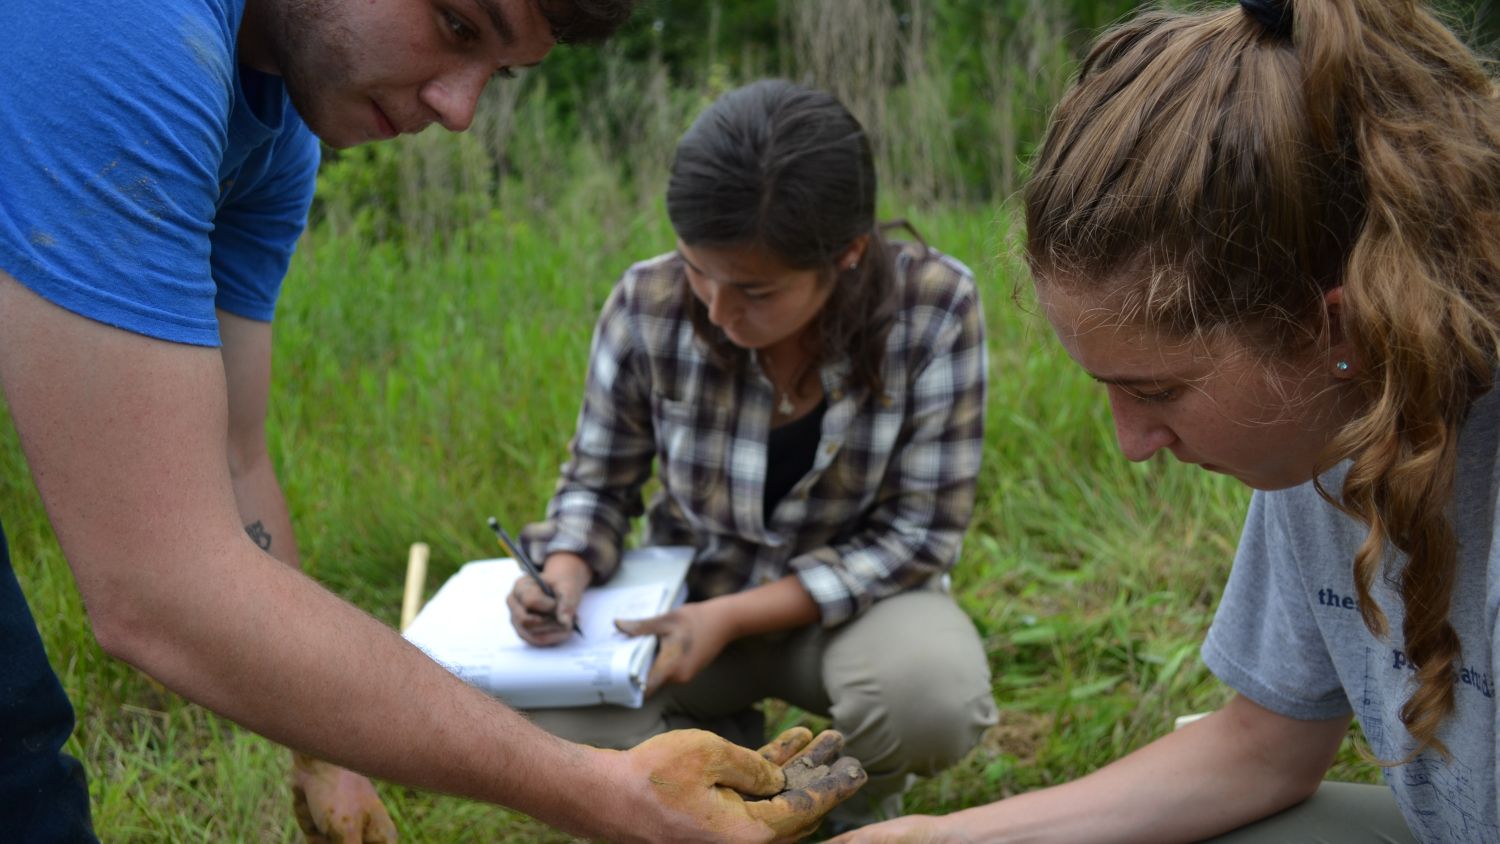 Three NC State College of Agriculture and Life Sciences students analyze soil in the field.